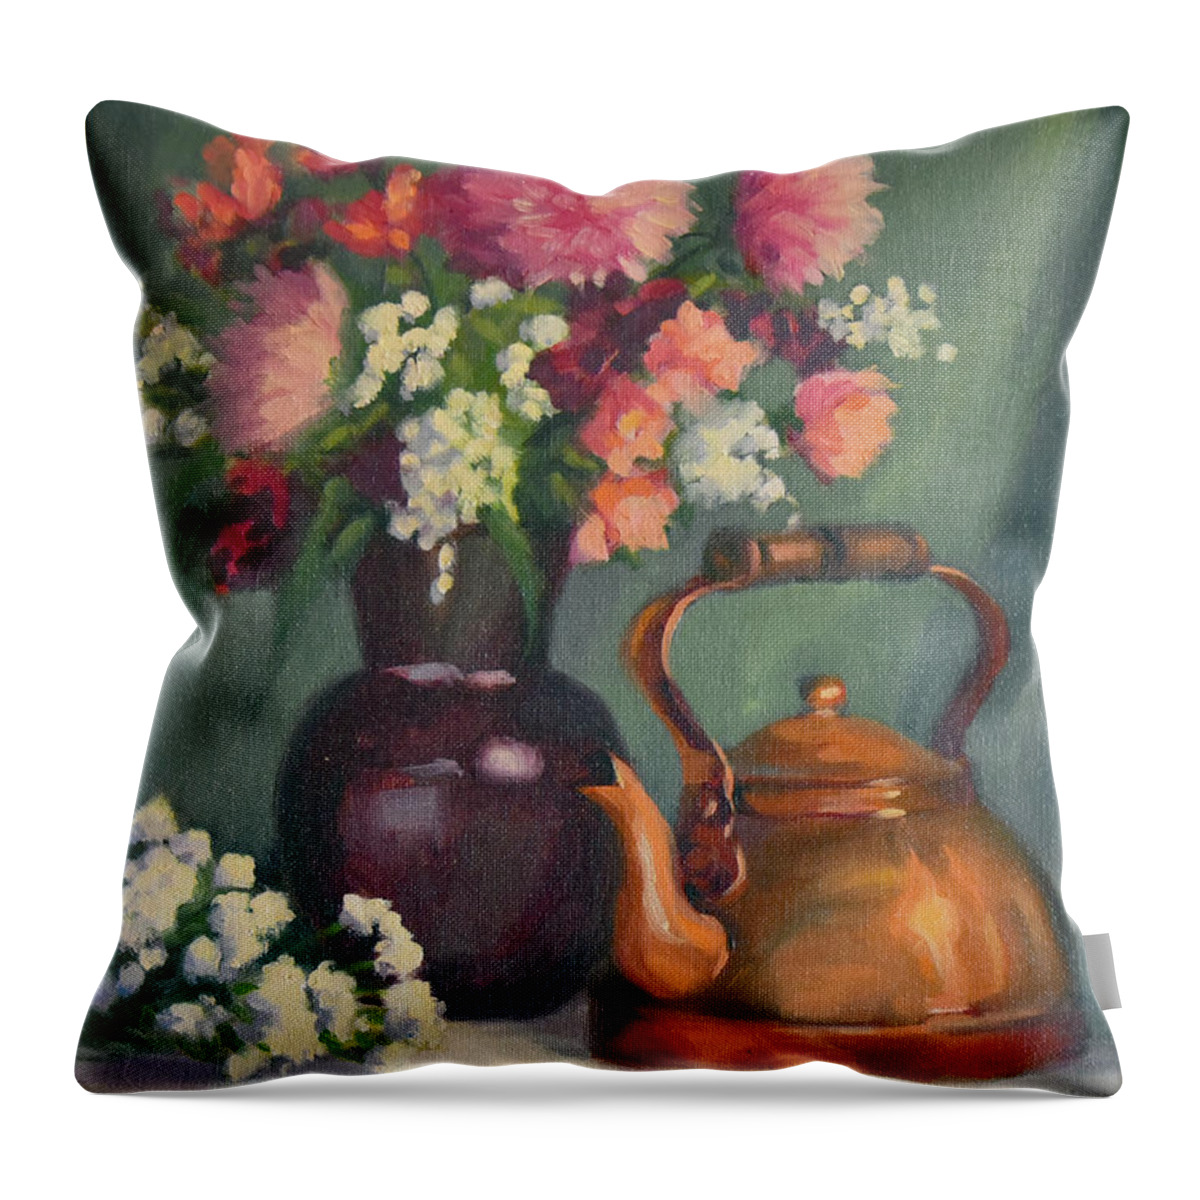 Still Life Throw Pillow featuring the painting Tea Time by Alice Leggett